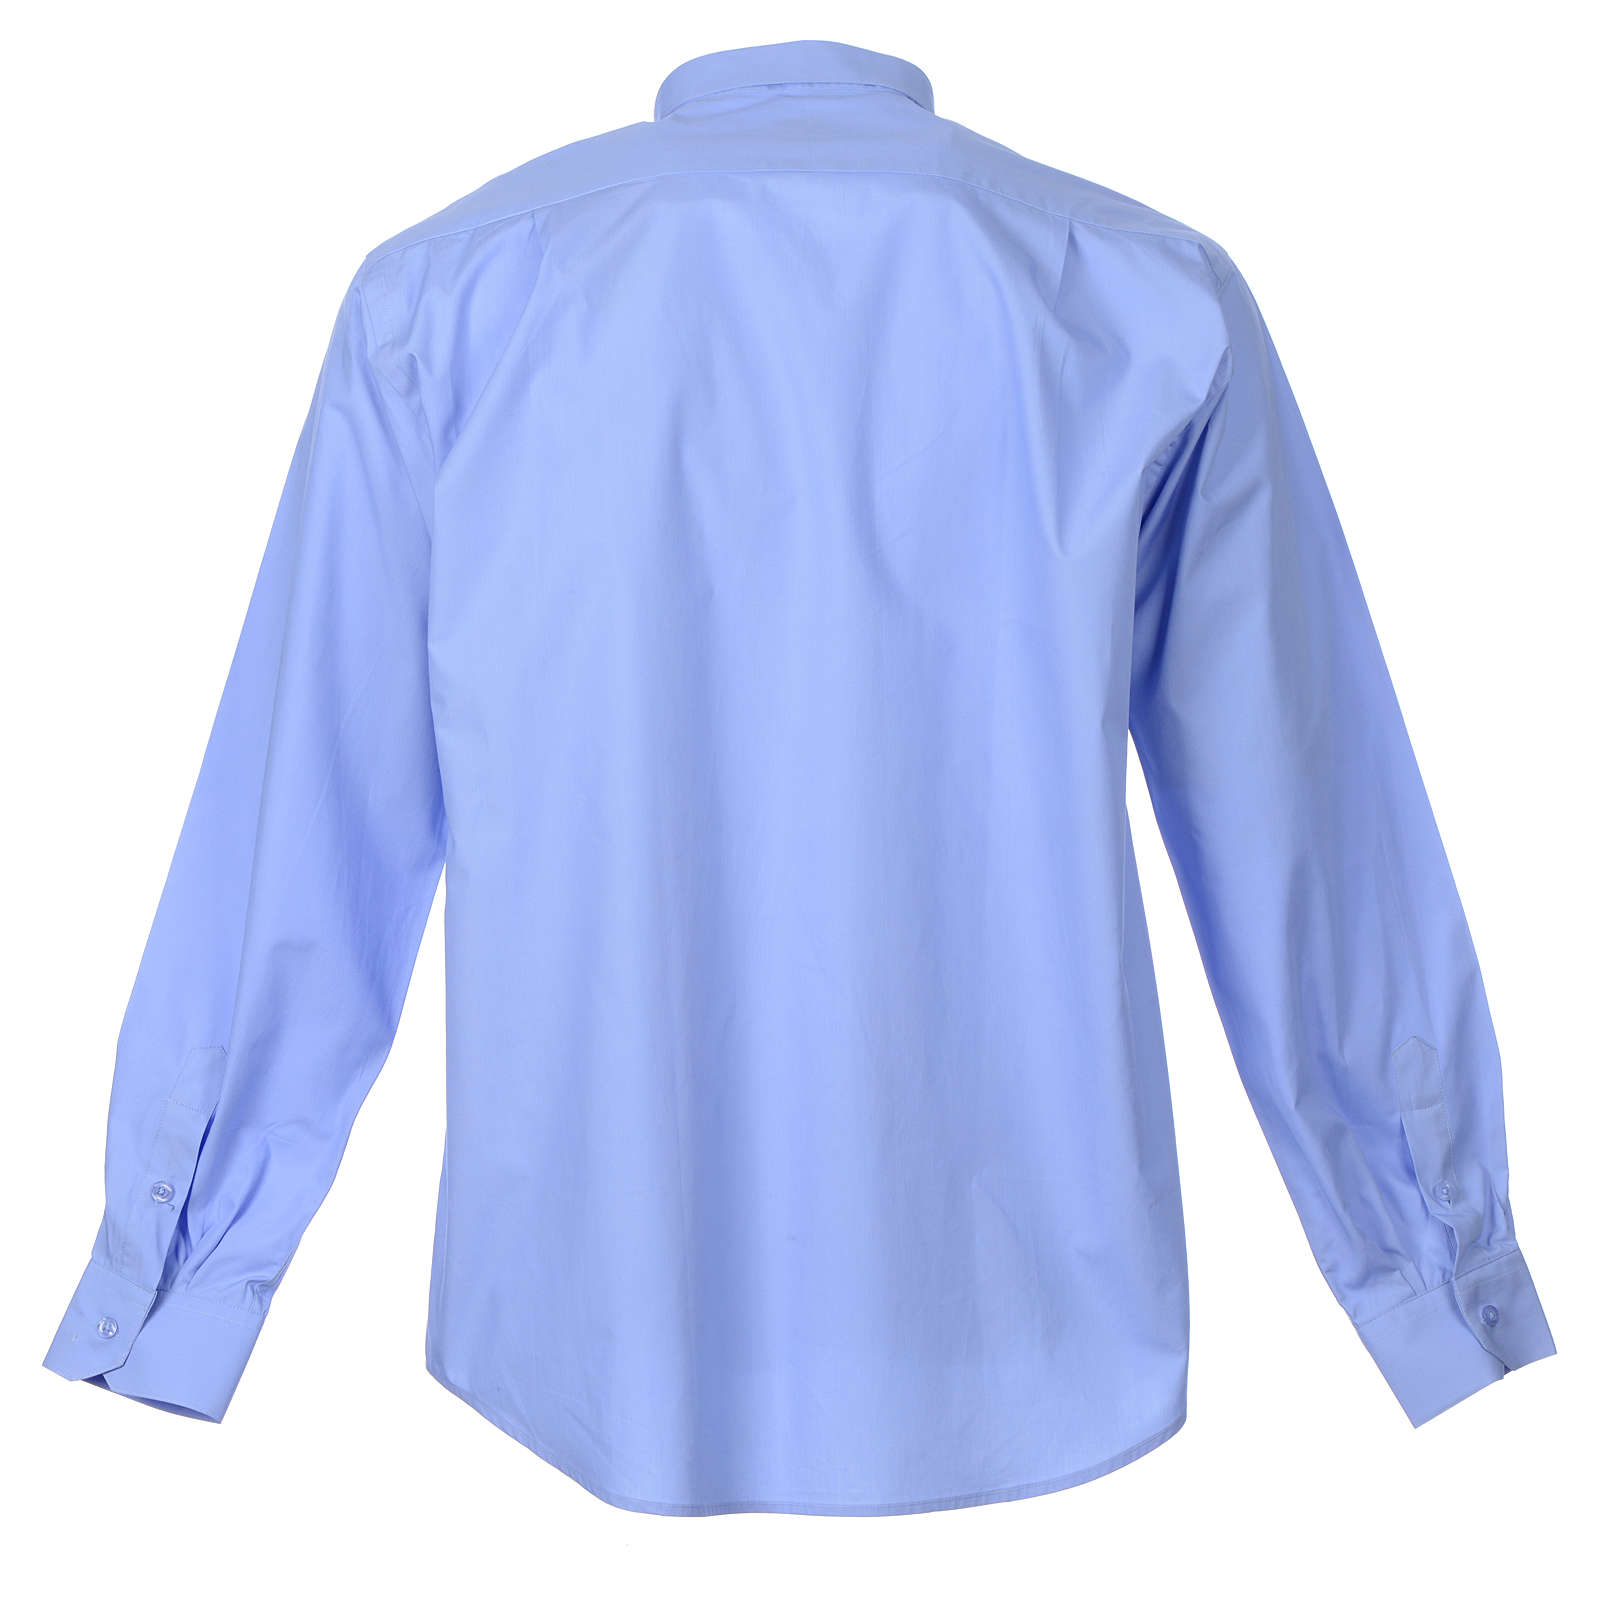 Clergy shirt, long sleeves in light blue mixed cotton | online sales on ...